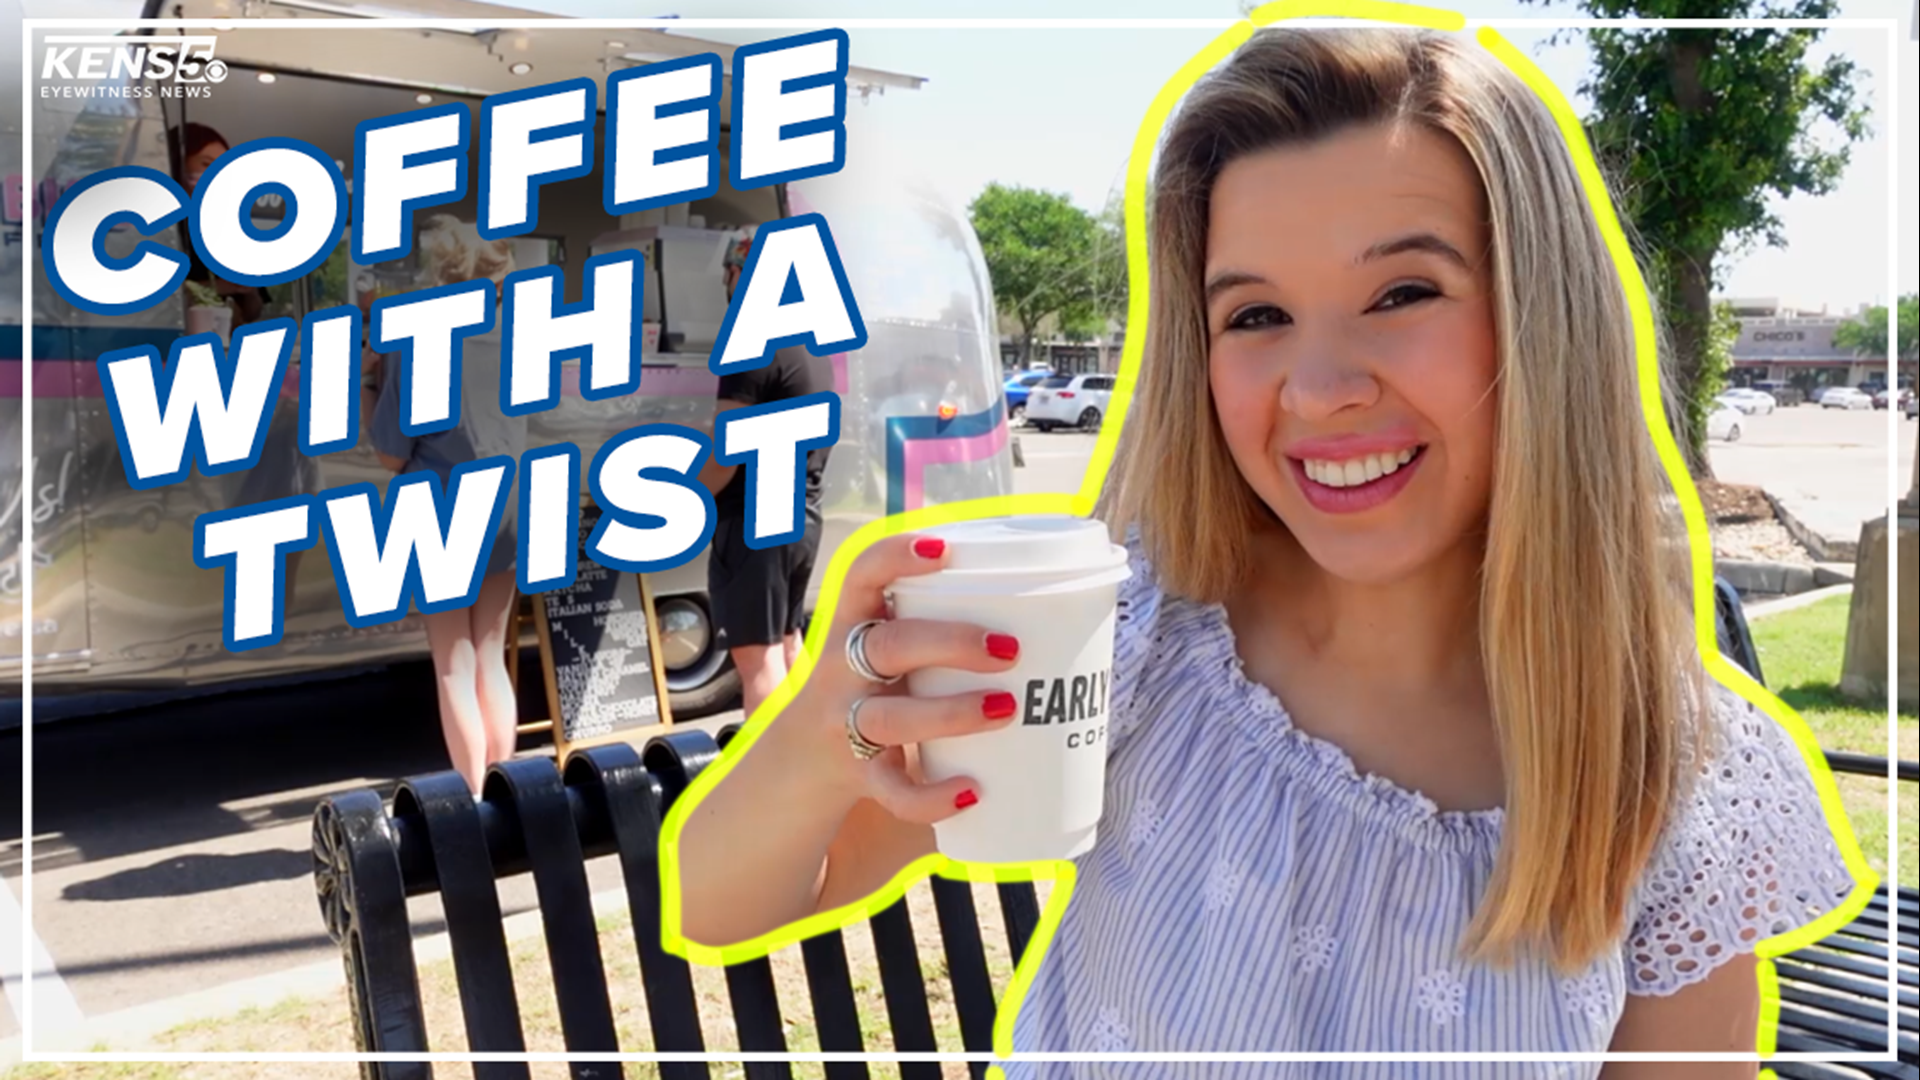 One San Antonio food truck has been getting a lot of buzz on social media, totaling thousands of "likes." Lexi Hazlett takes you to Early Bird Coffee.